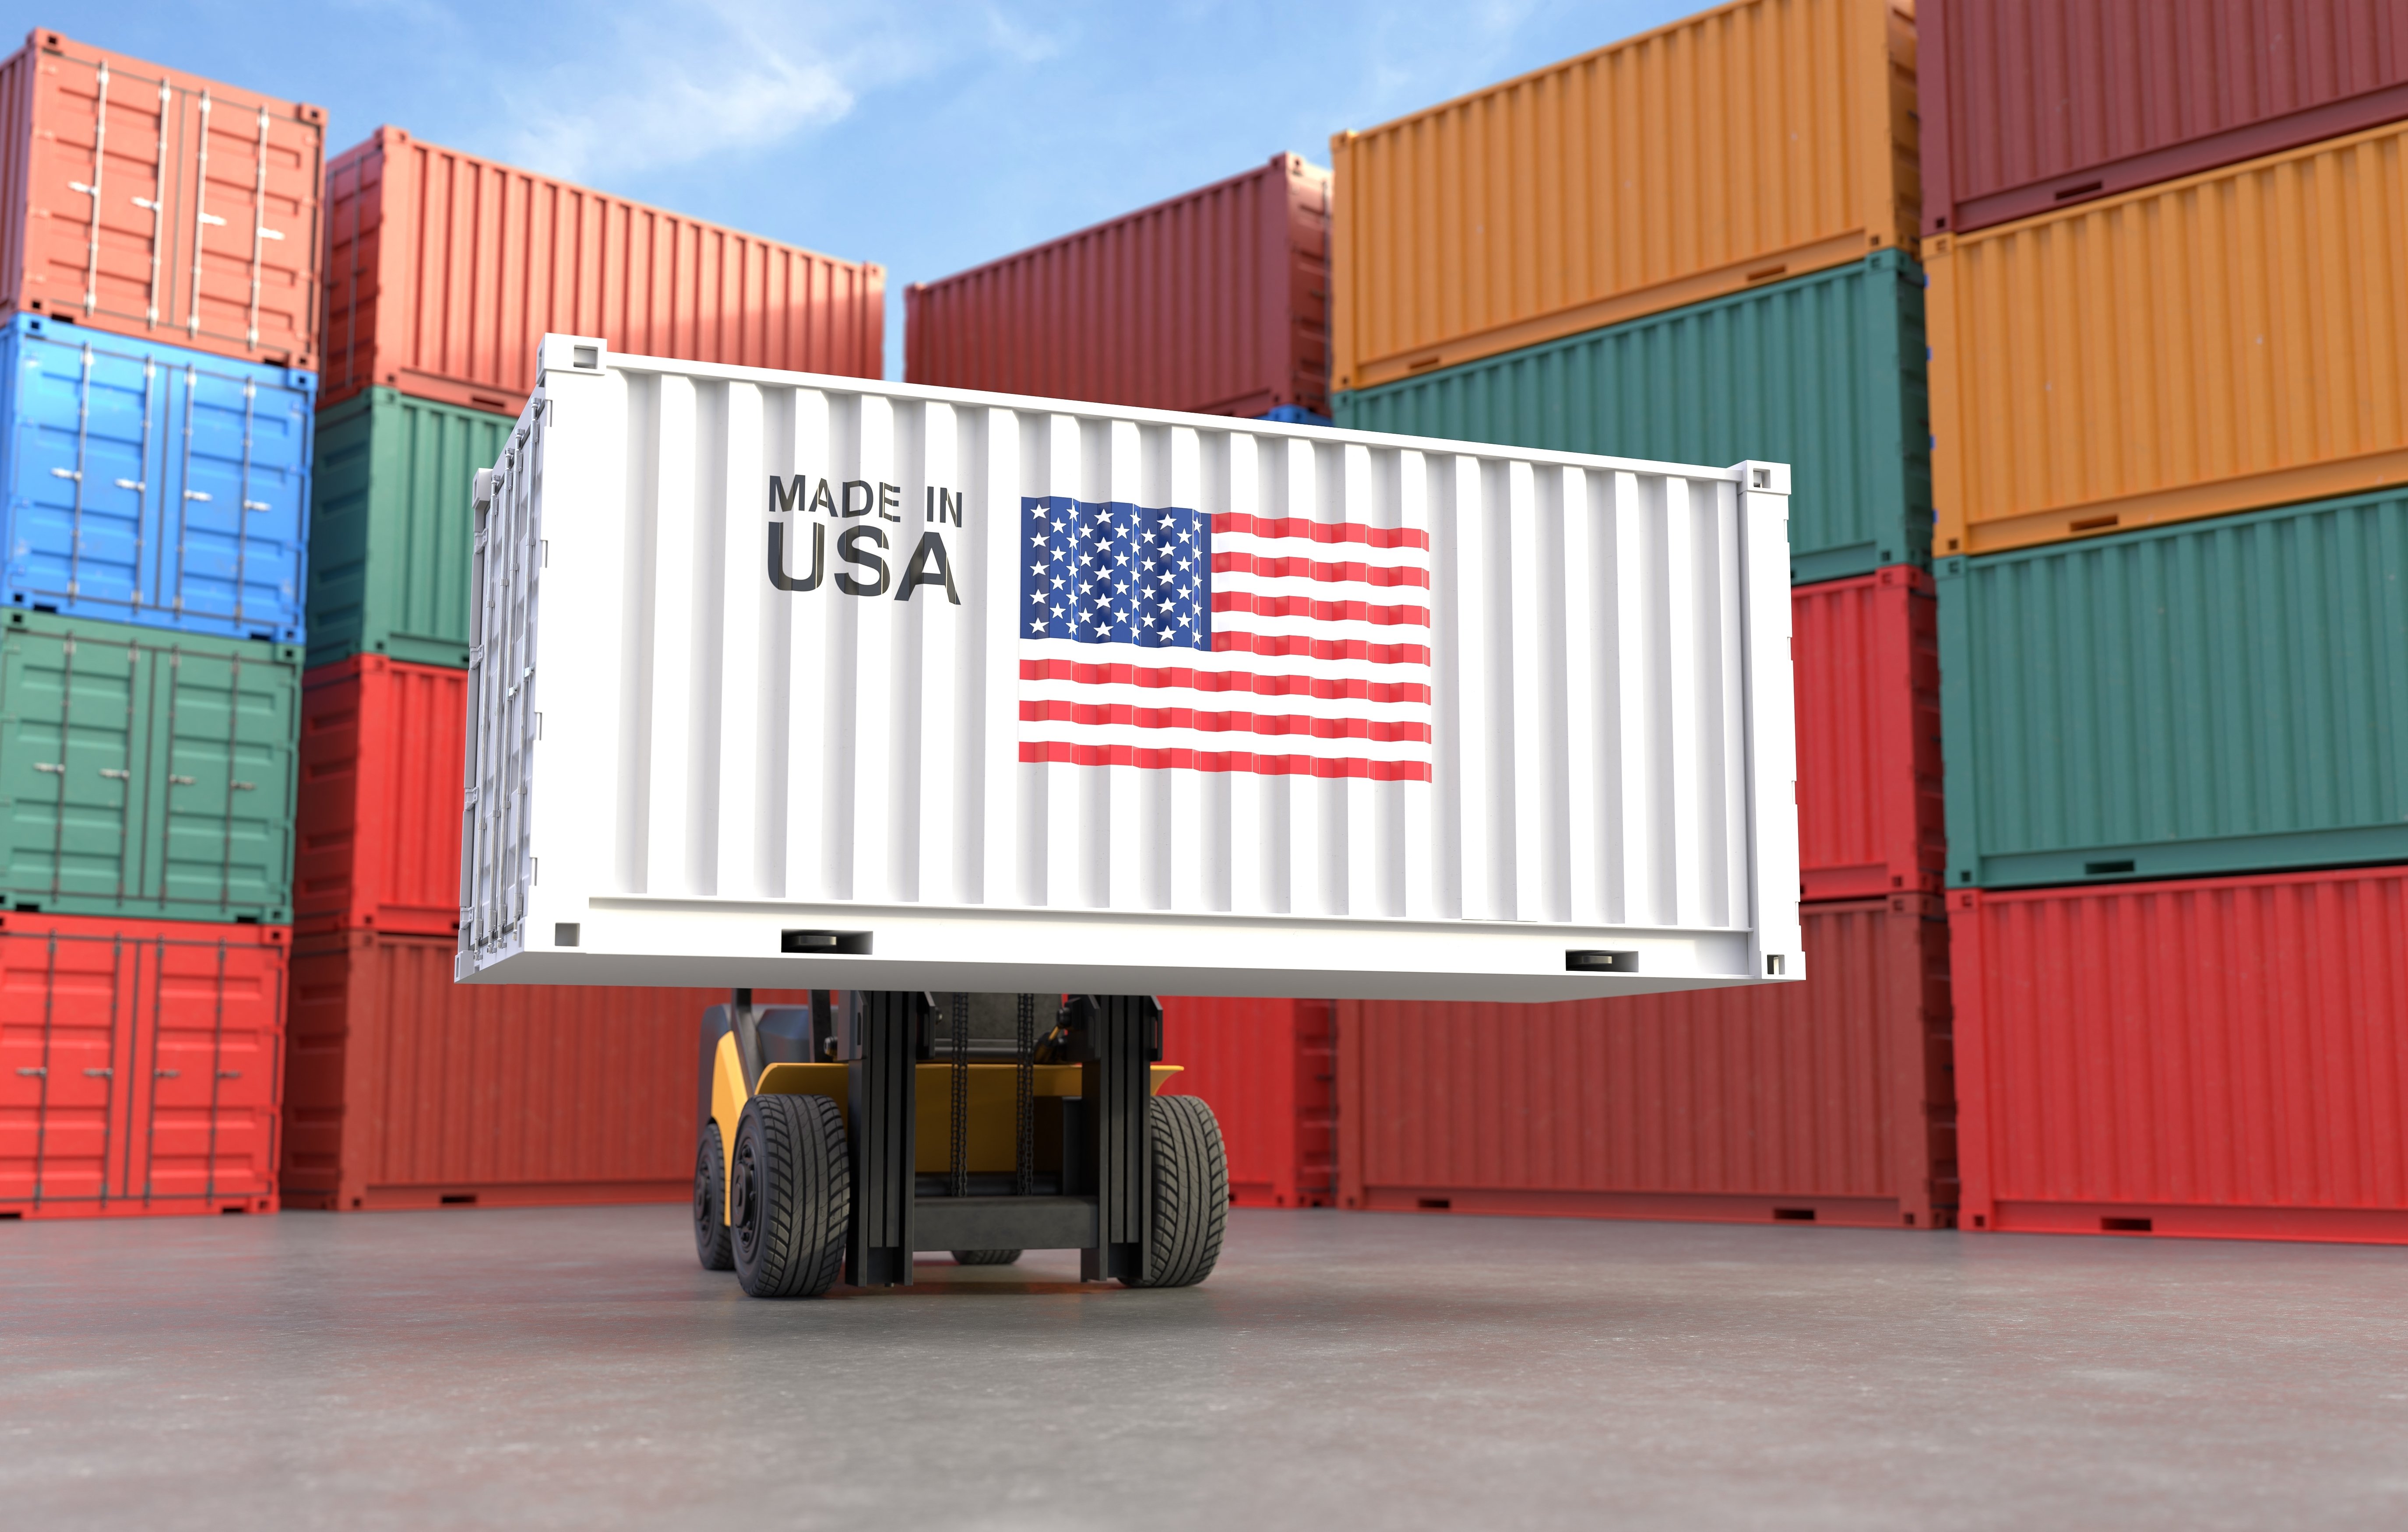 Twenty shipping containers stacked four high surround forklift bearing shipping container with image of U.S. flag and words “Made in USA.”